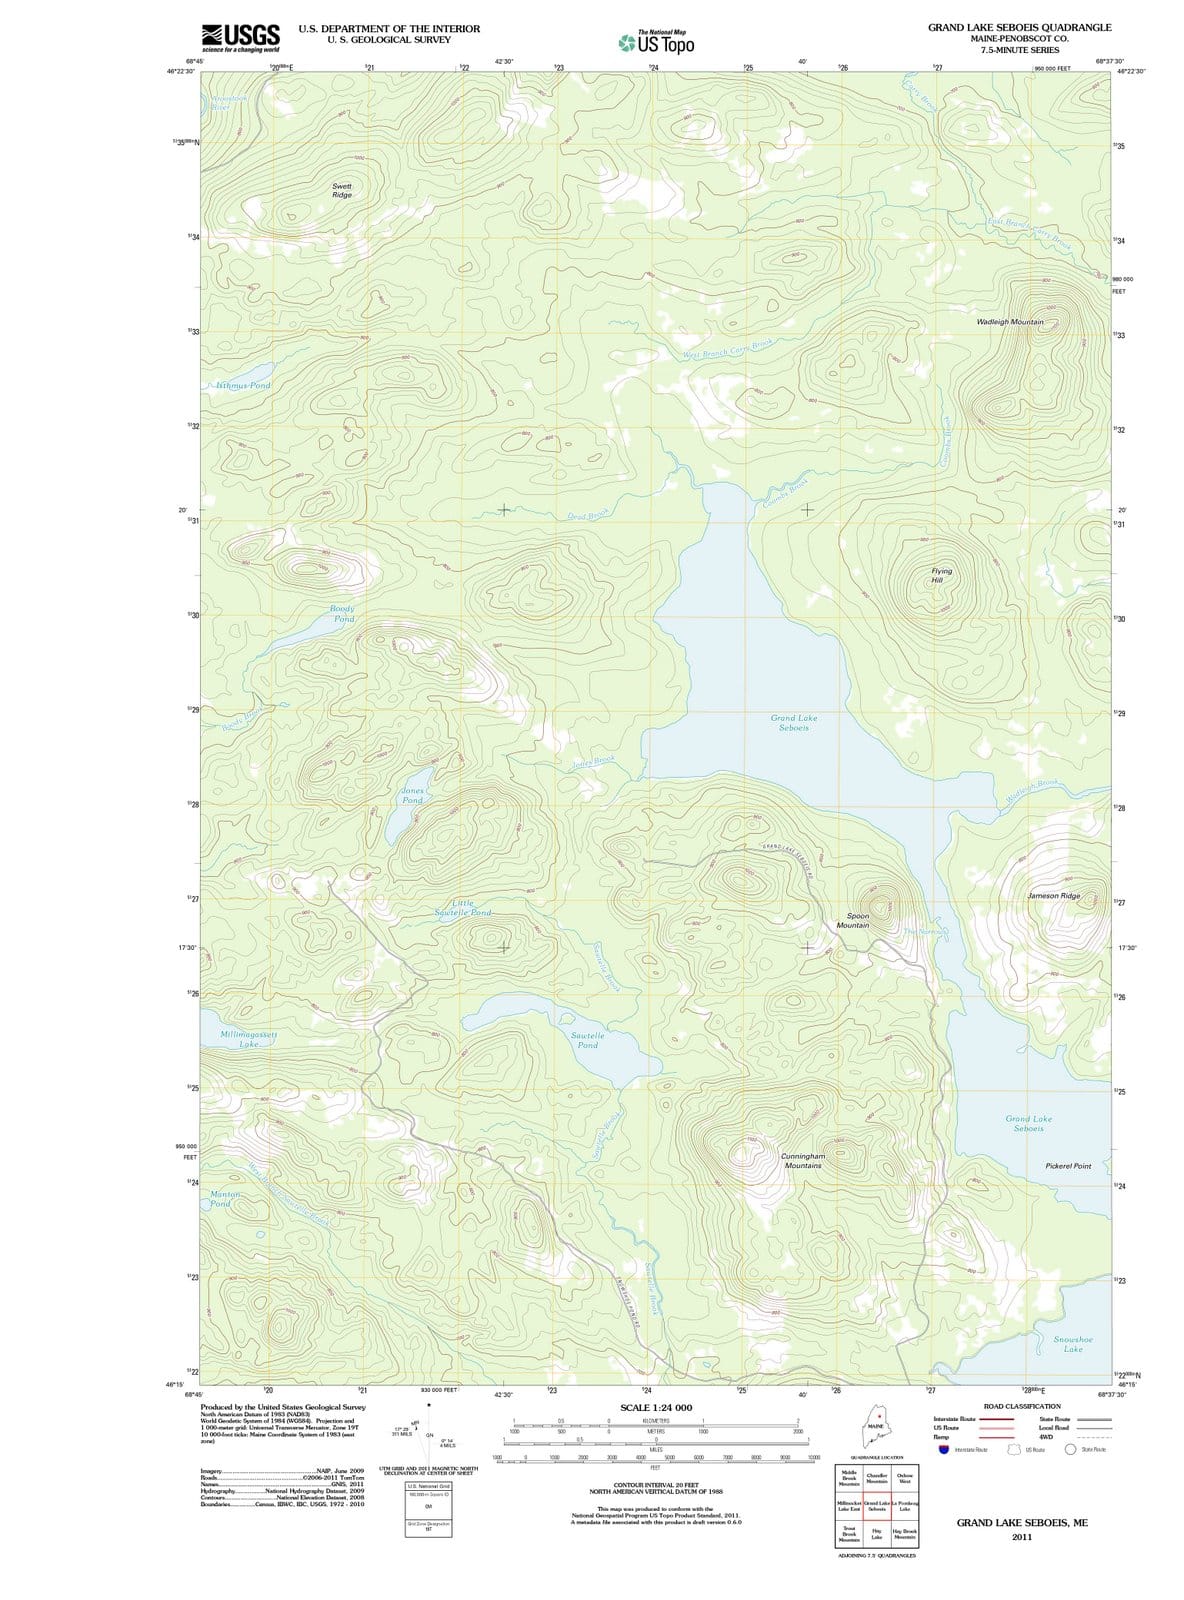 2011 Grand Lakeboeis, ME - Maine - USGS Topographic Map